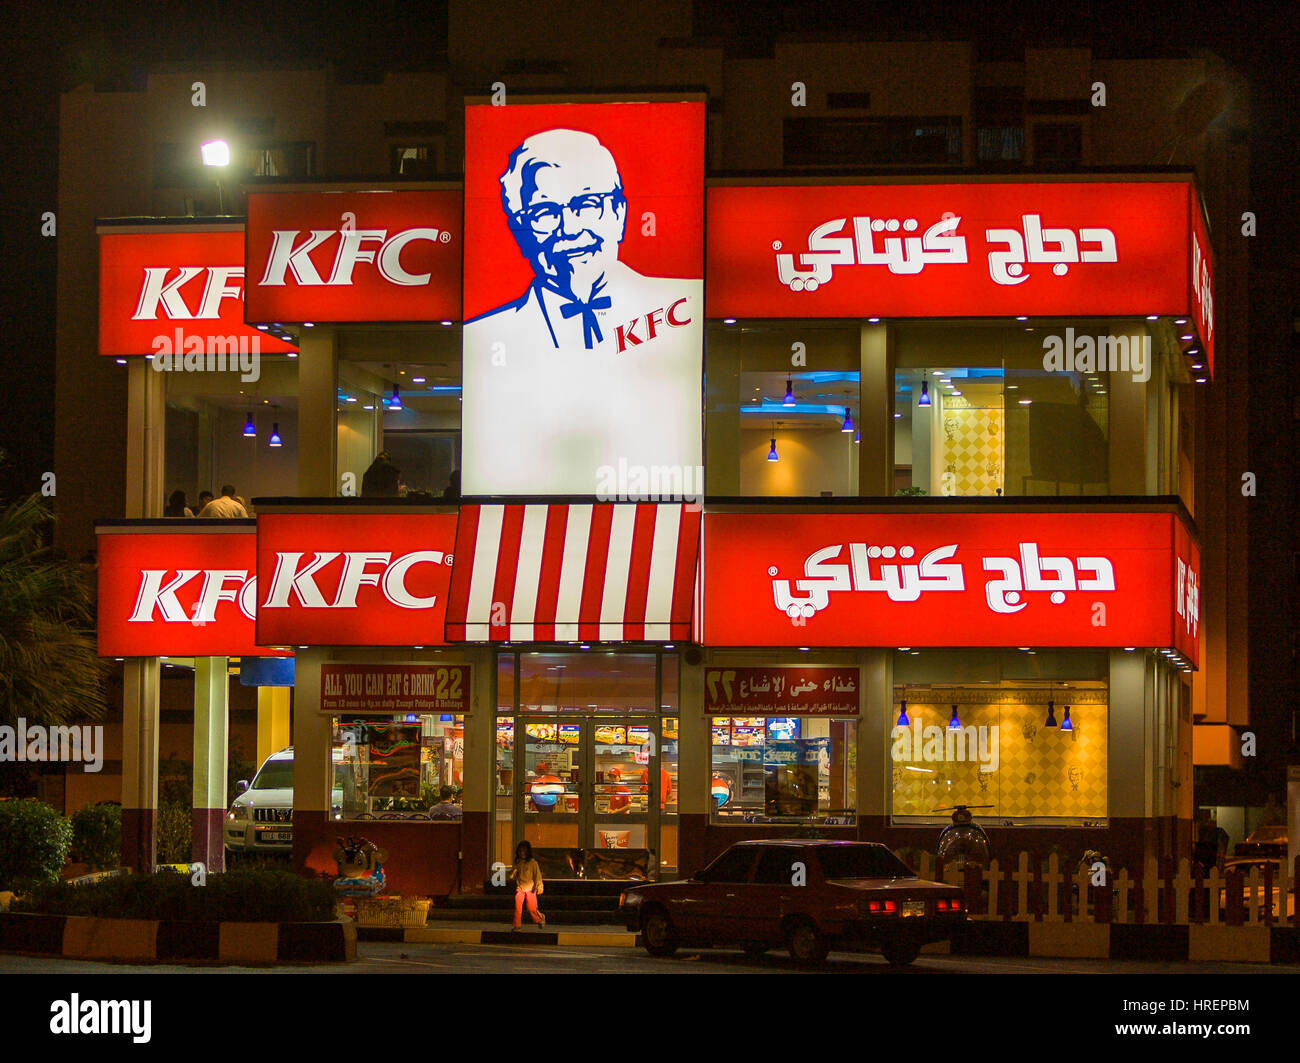 FUJAIRAH, UNITED ARAB EMIRATES - Kentucky Fried Chicken fast food restaurant, with KFC arabic and english signs. Stock Photo